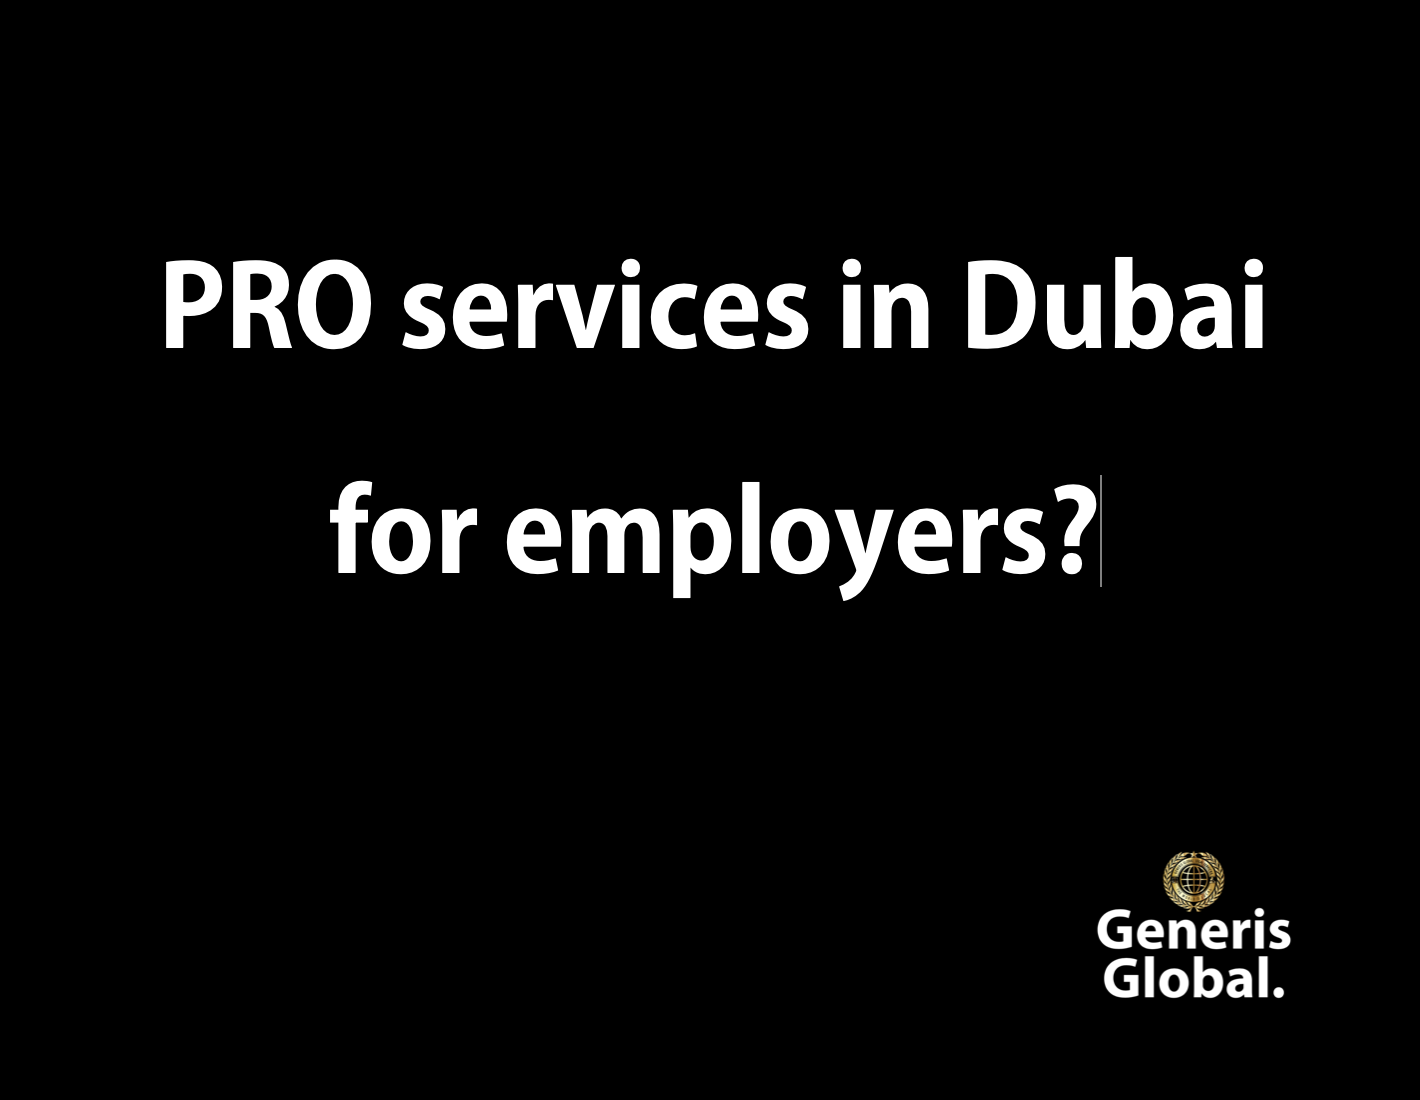 PRO services in Dubai for employers